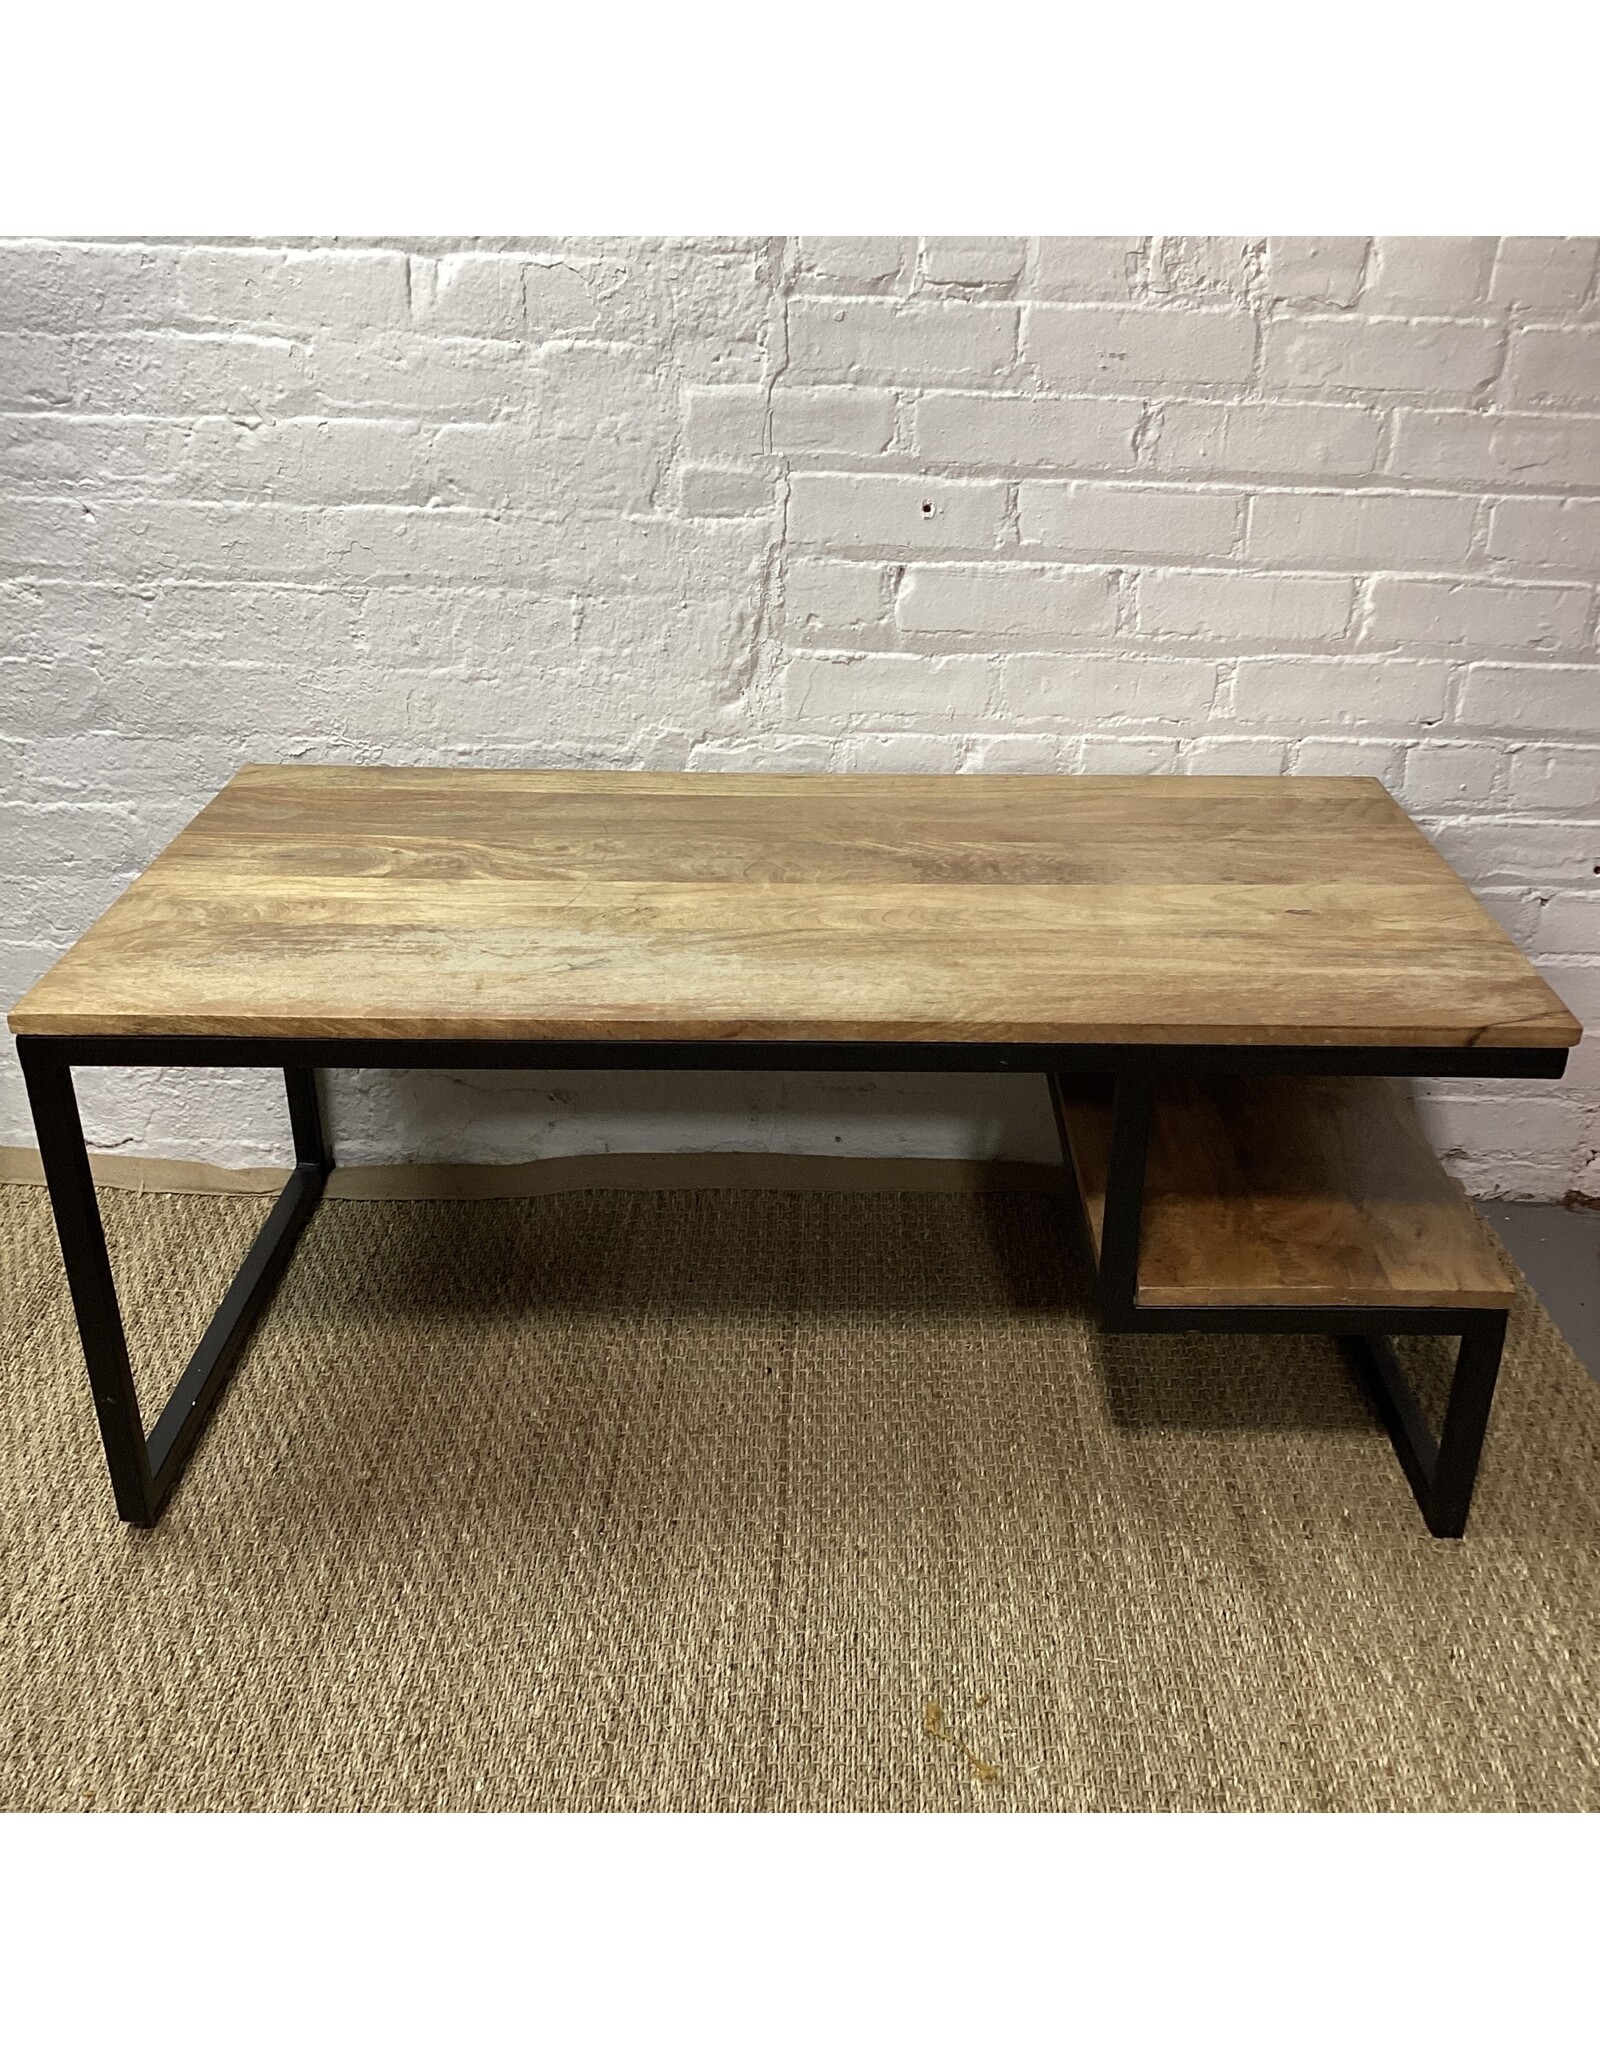 Wooden and Metal Industrial Style Desk